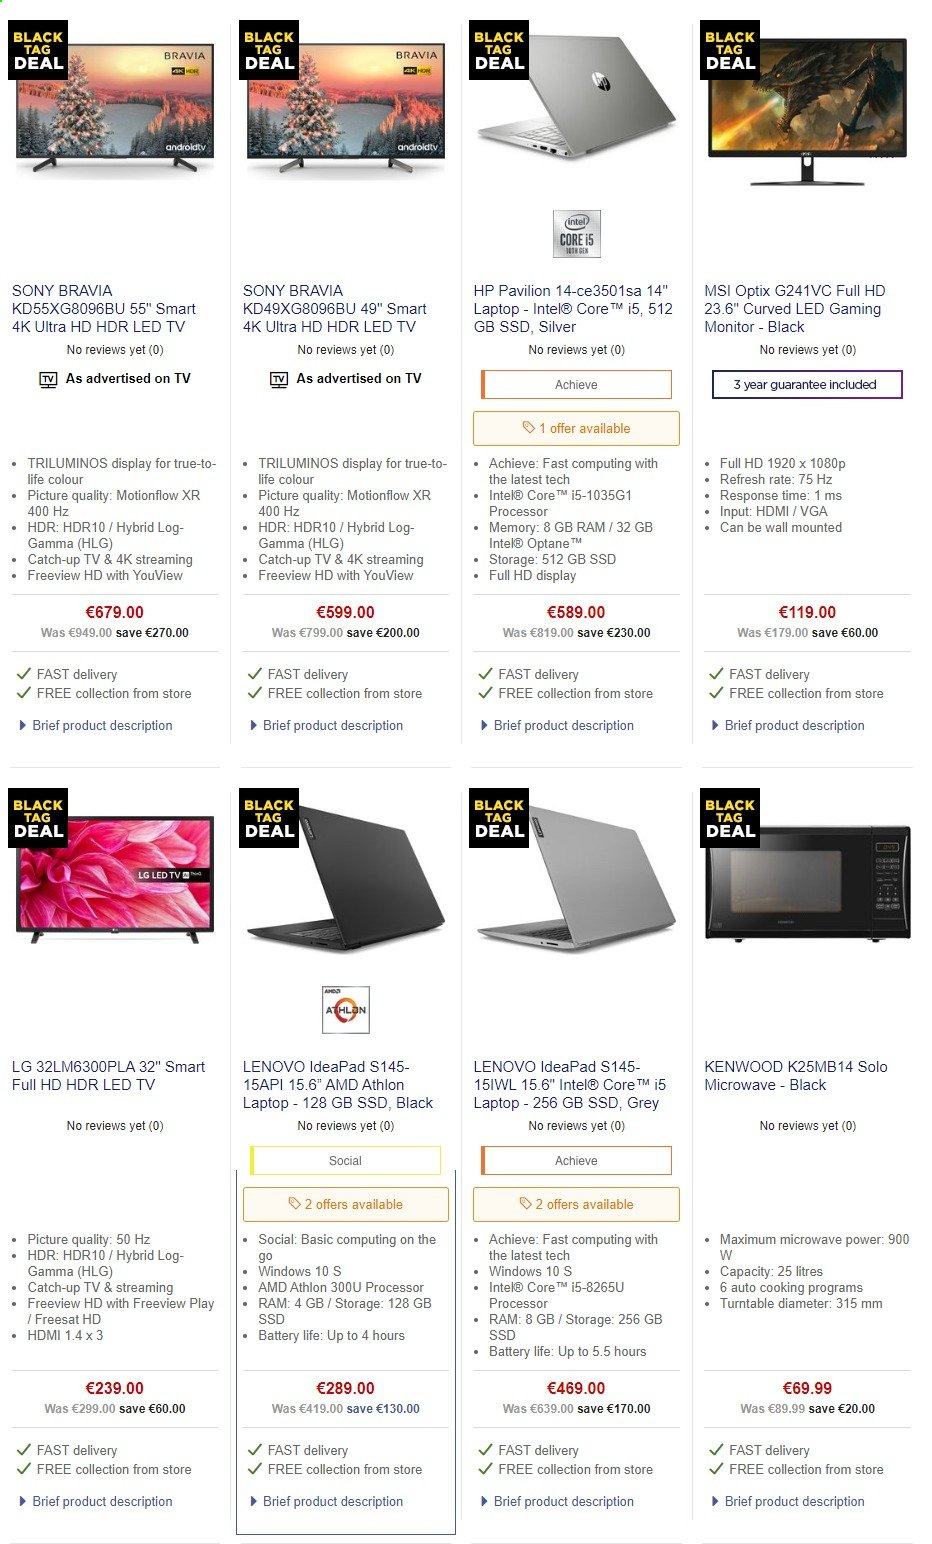 thumbnail - Currys offer  - Sales products - Sony, LG, Lenovo, Hewlett Packard, laptop, MSI, Intel, Athlon, monitor, Android TV, LED TV, UHD TV, ultra hd, TV, microwave, Kenwood. Page 1.